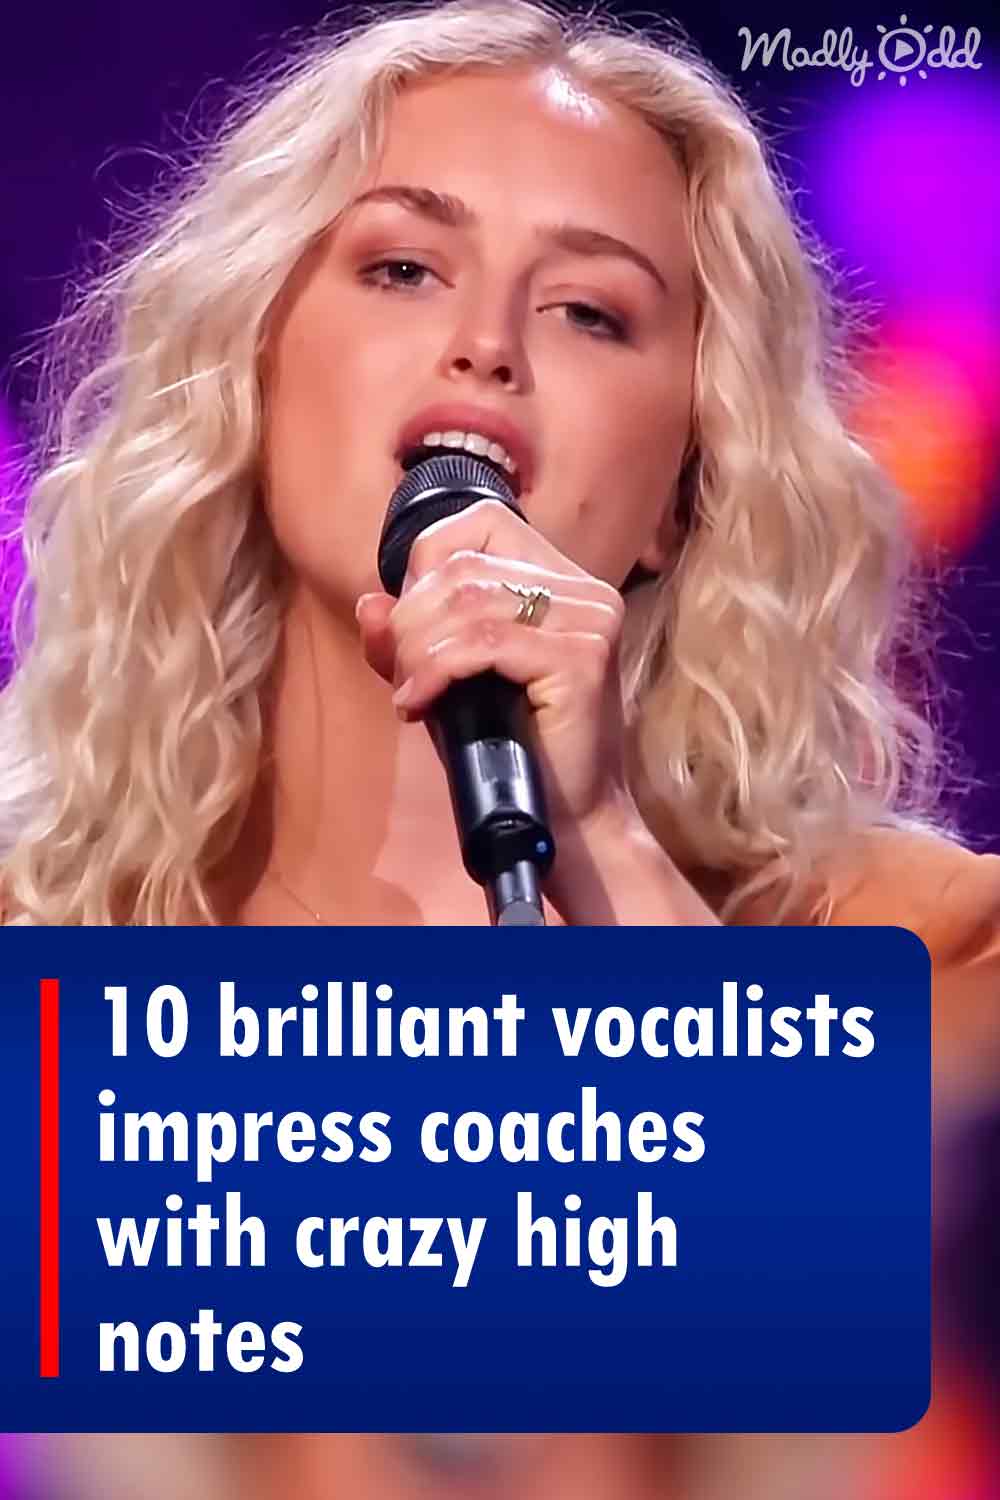 10 brilliant vocalists impress coaches with crazy high notes